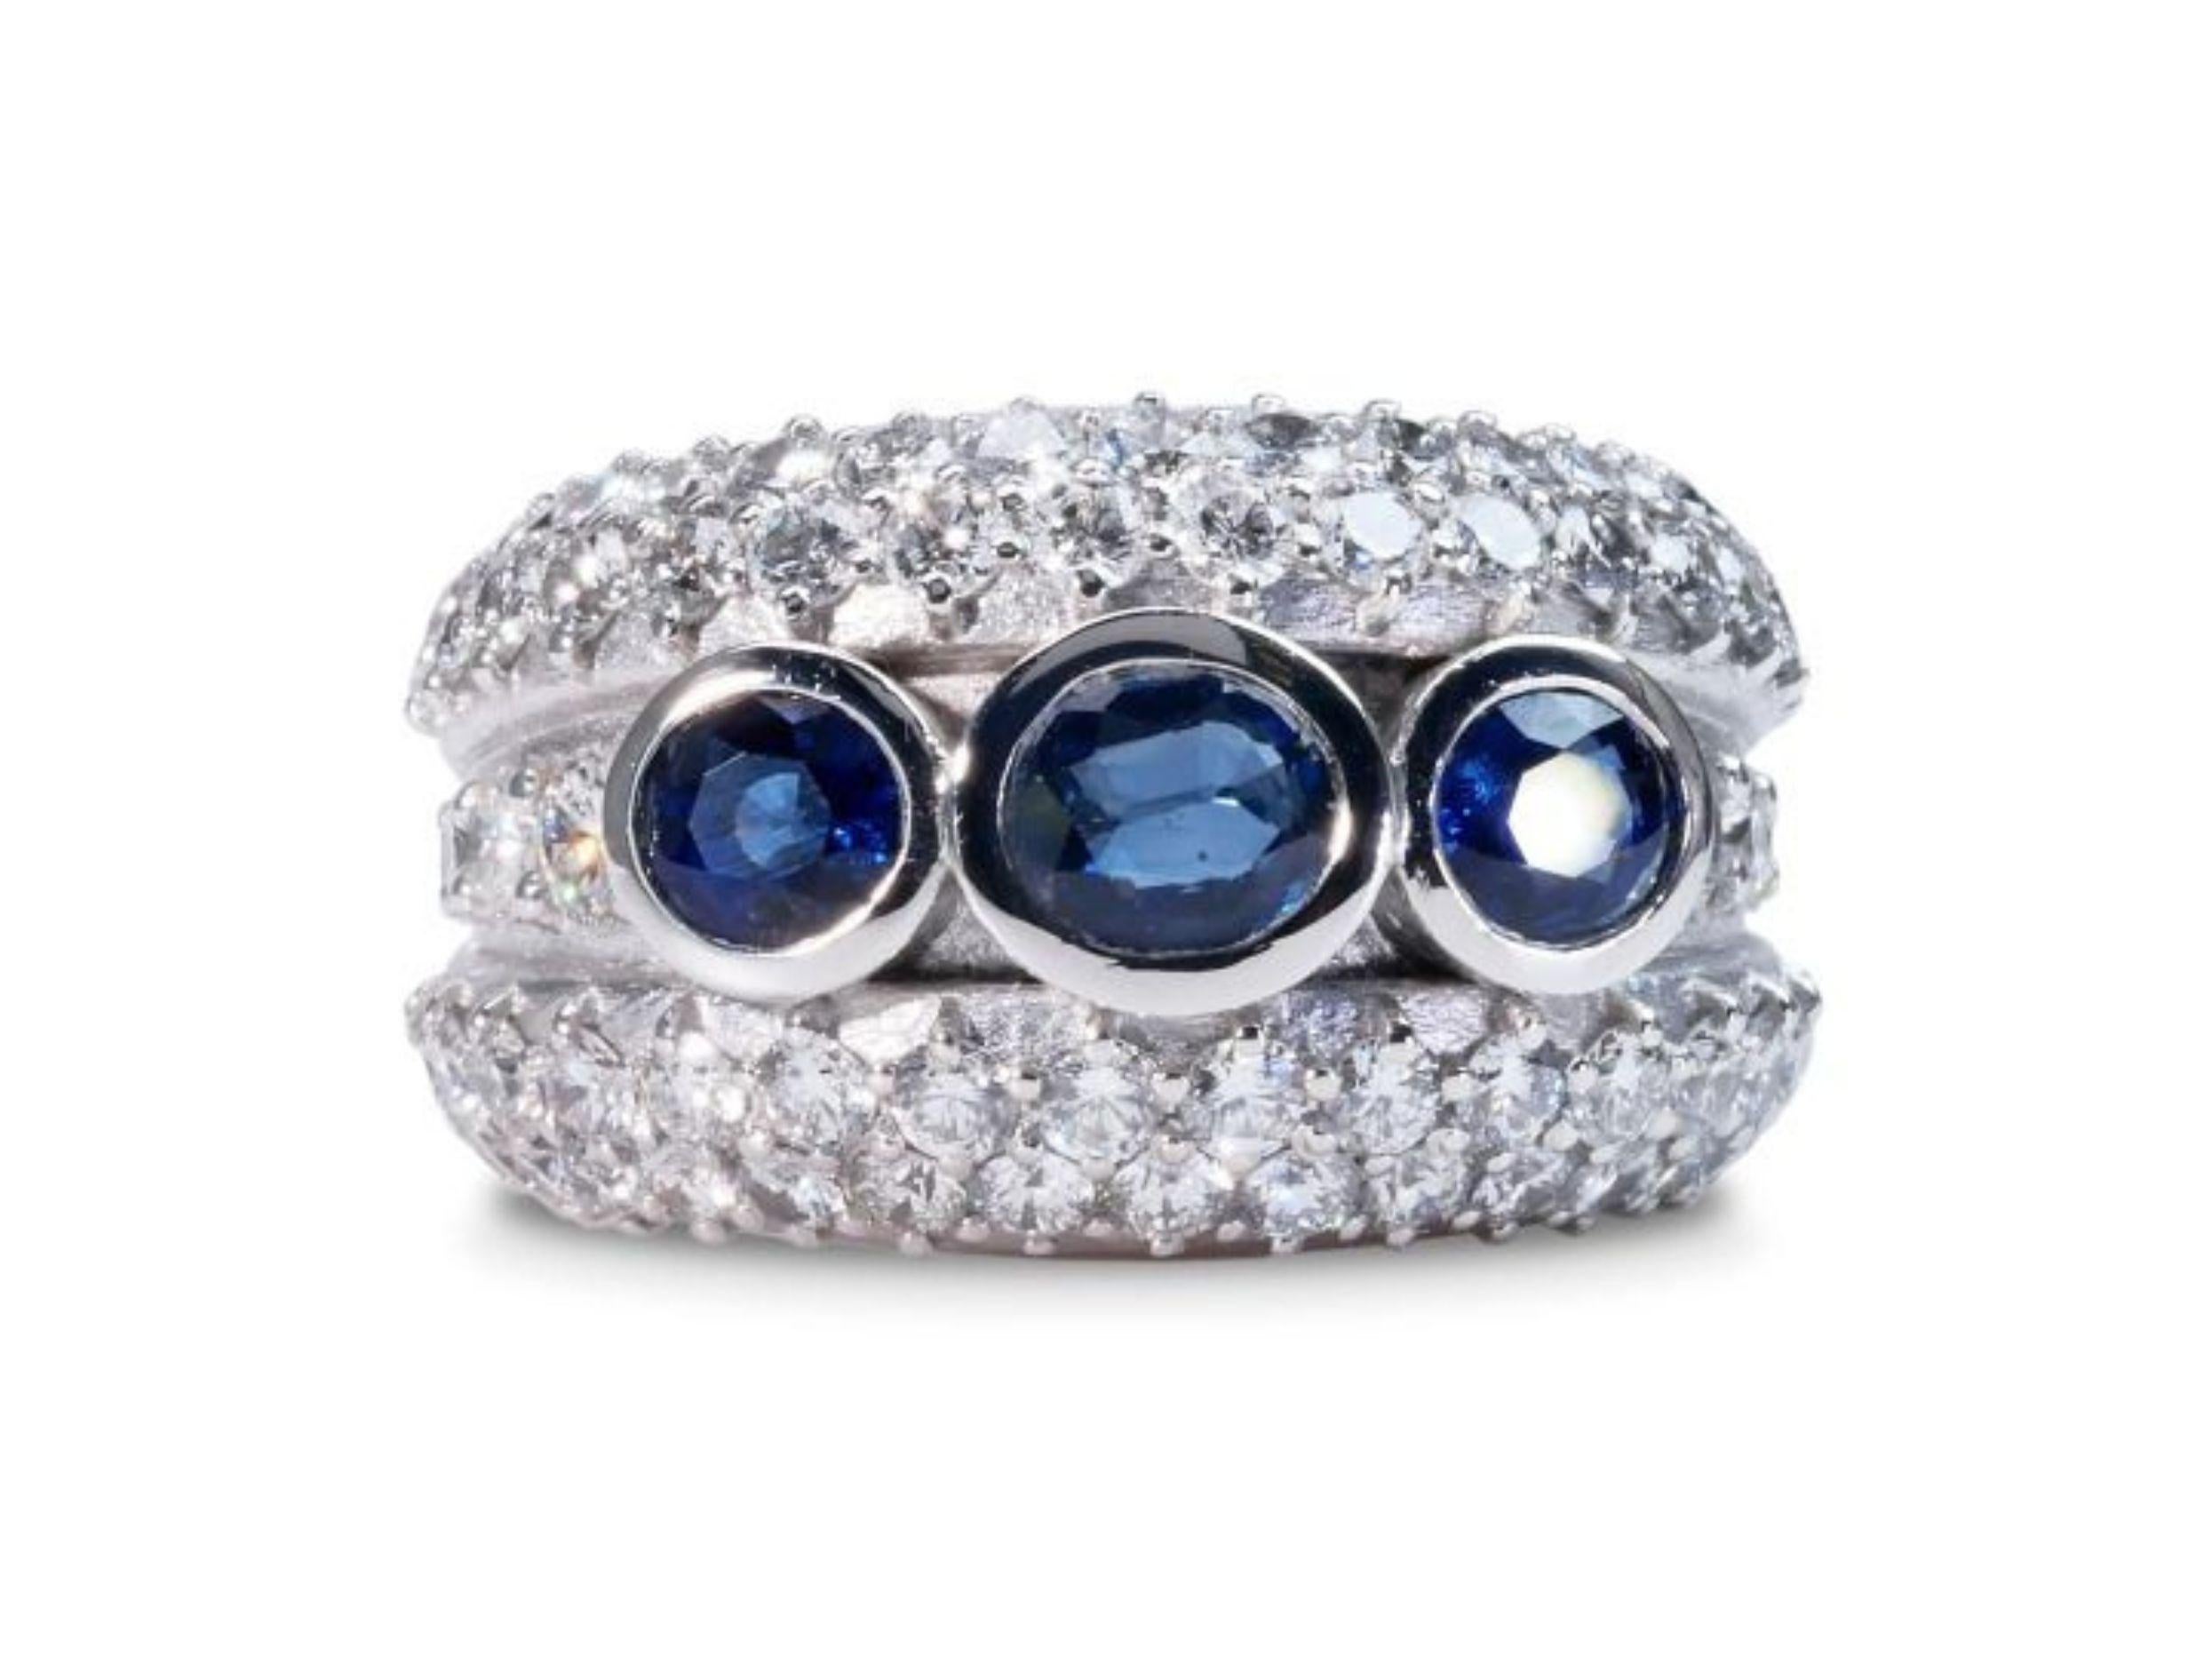 Oval Cut Gorgeous 1.70ct. Oval Mixed Cut Vintage Style Sapphire Ring For Sale